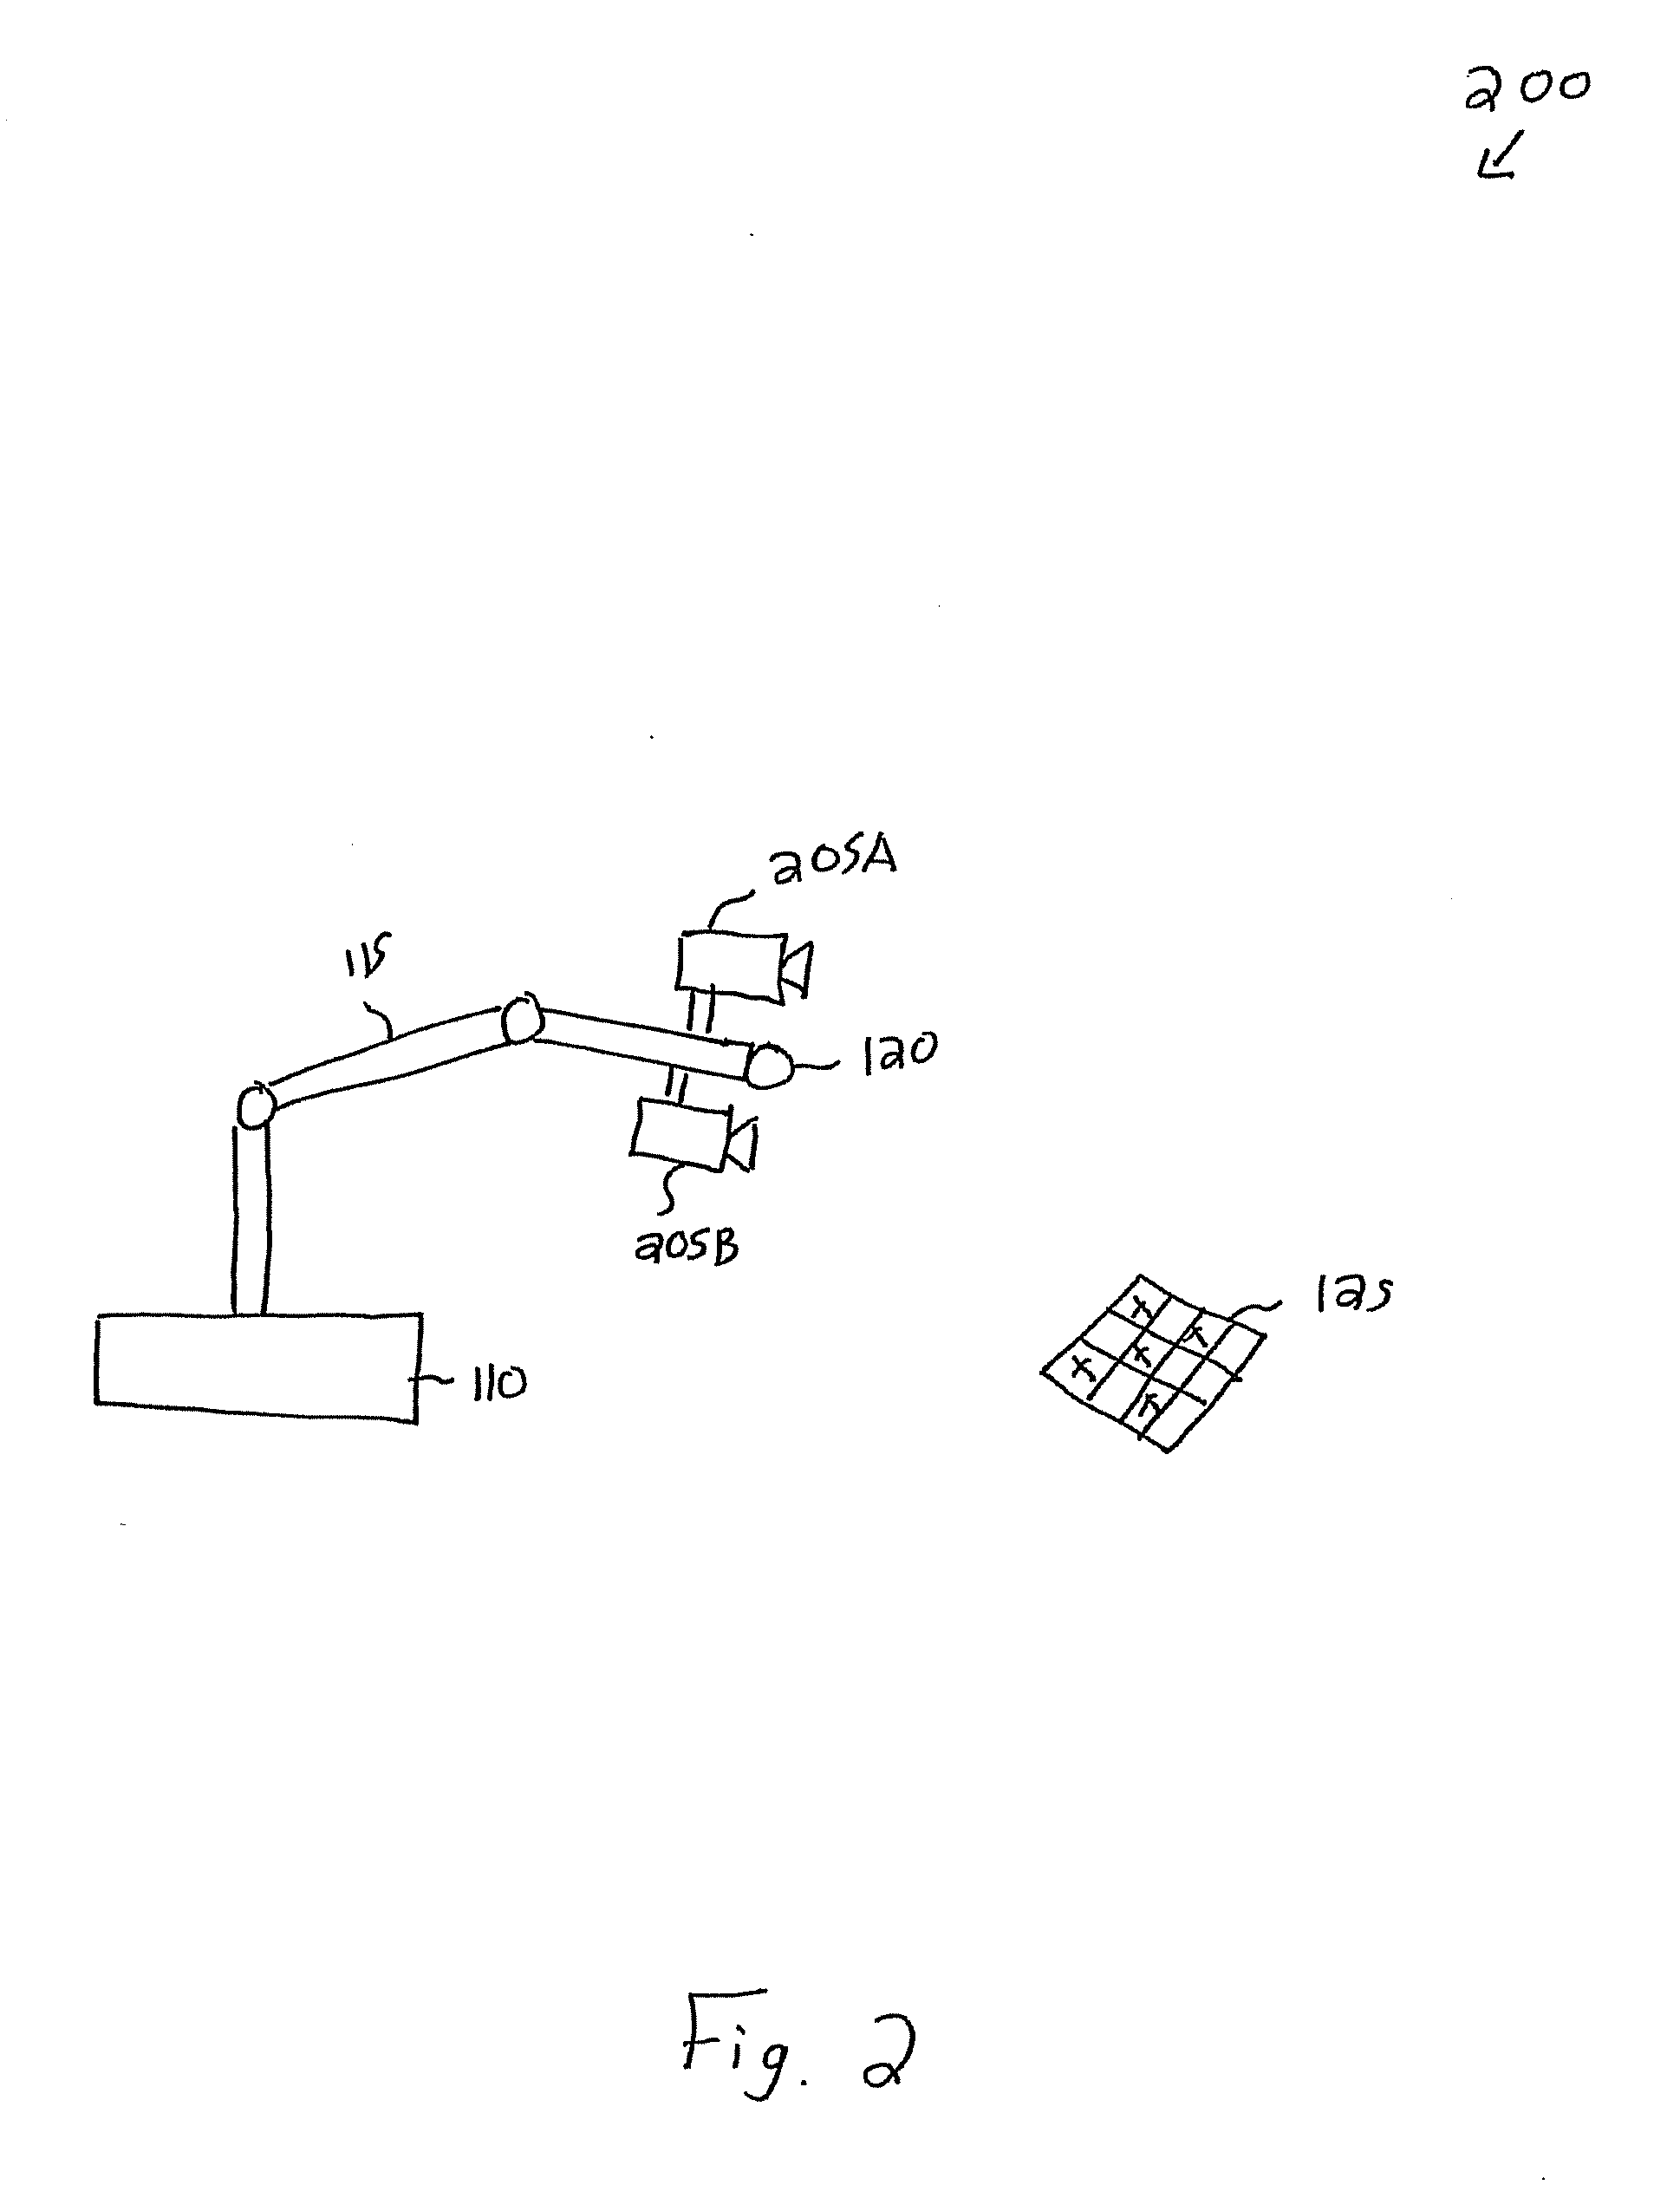 System and method for robust calibration between a machine vision system and a robot